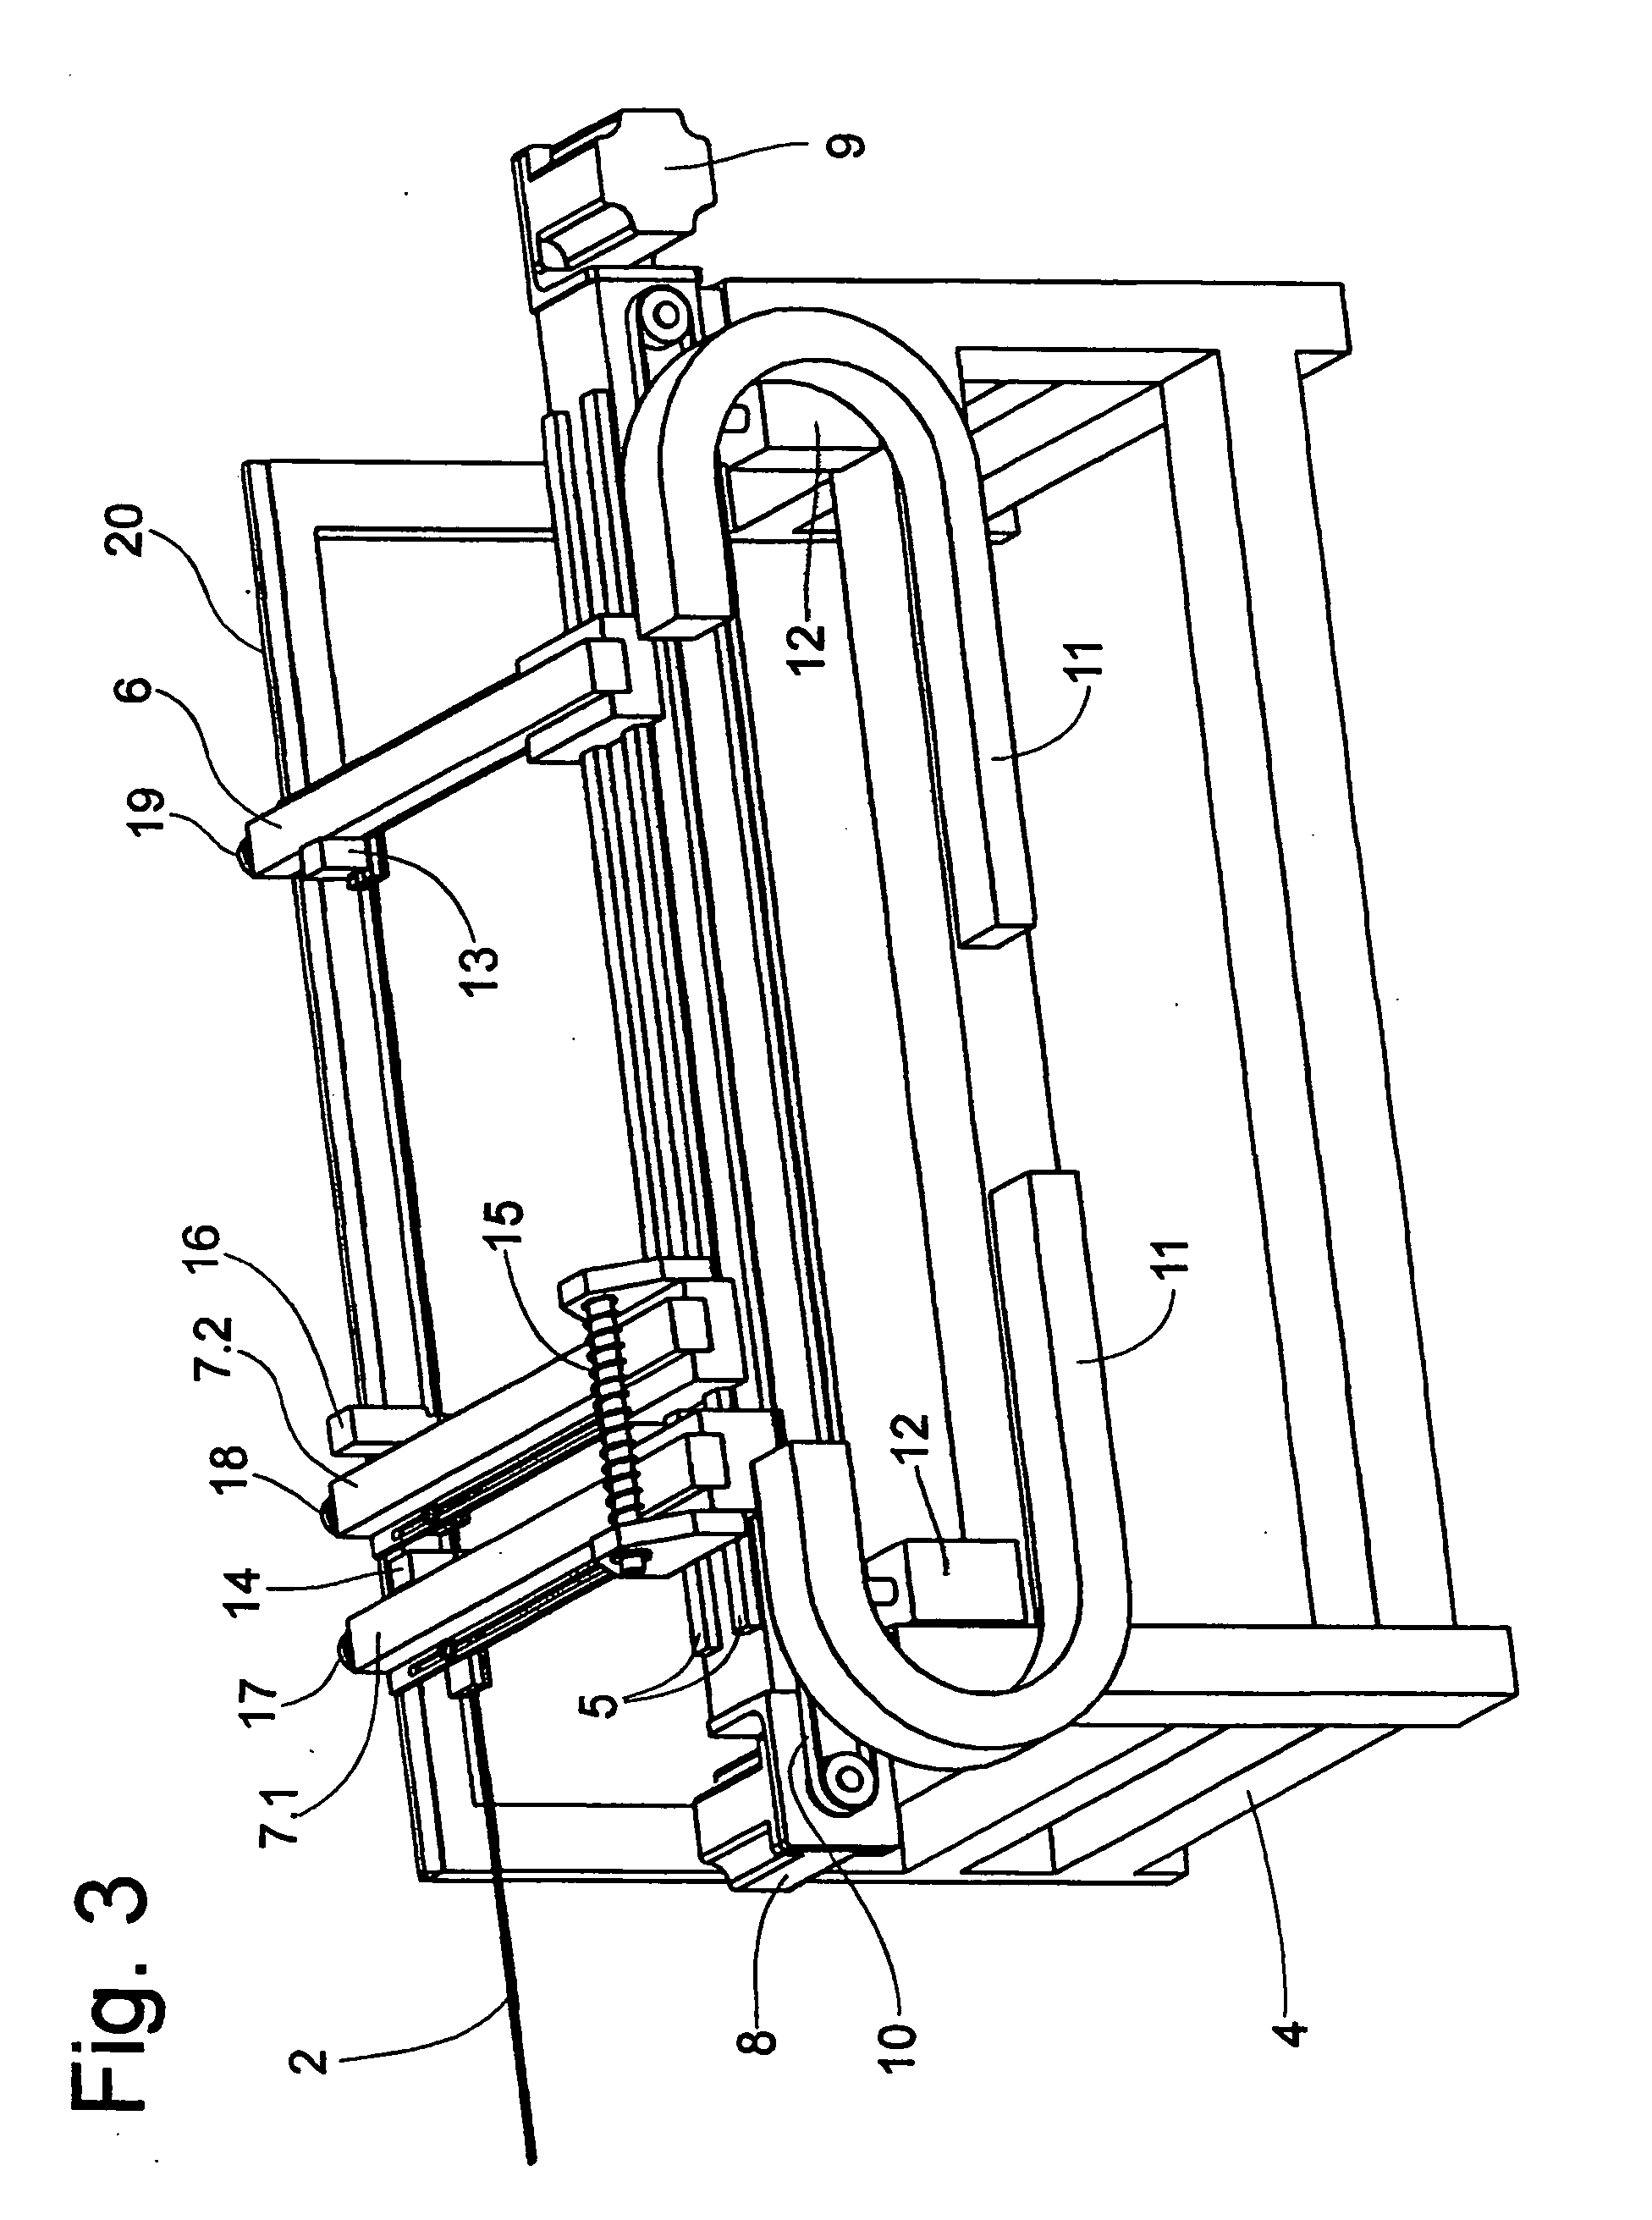 Apparatus and method for aligning and fixing ribbon on a solar cell